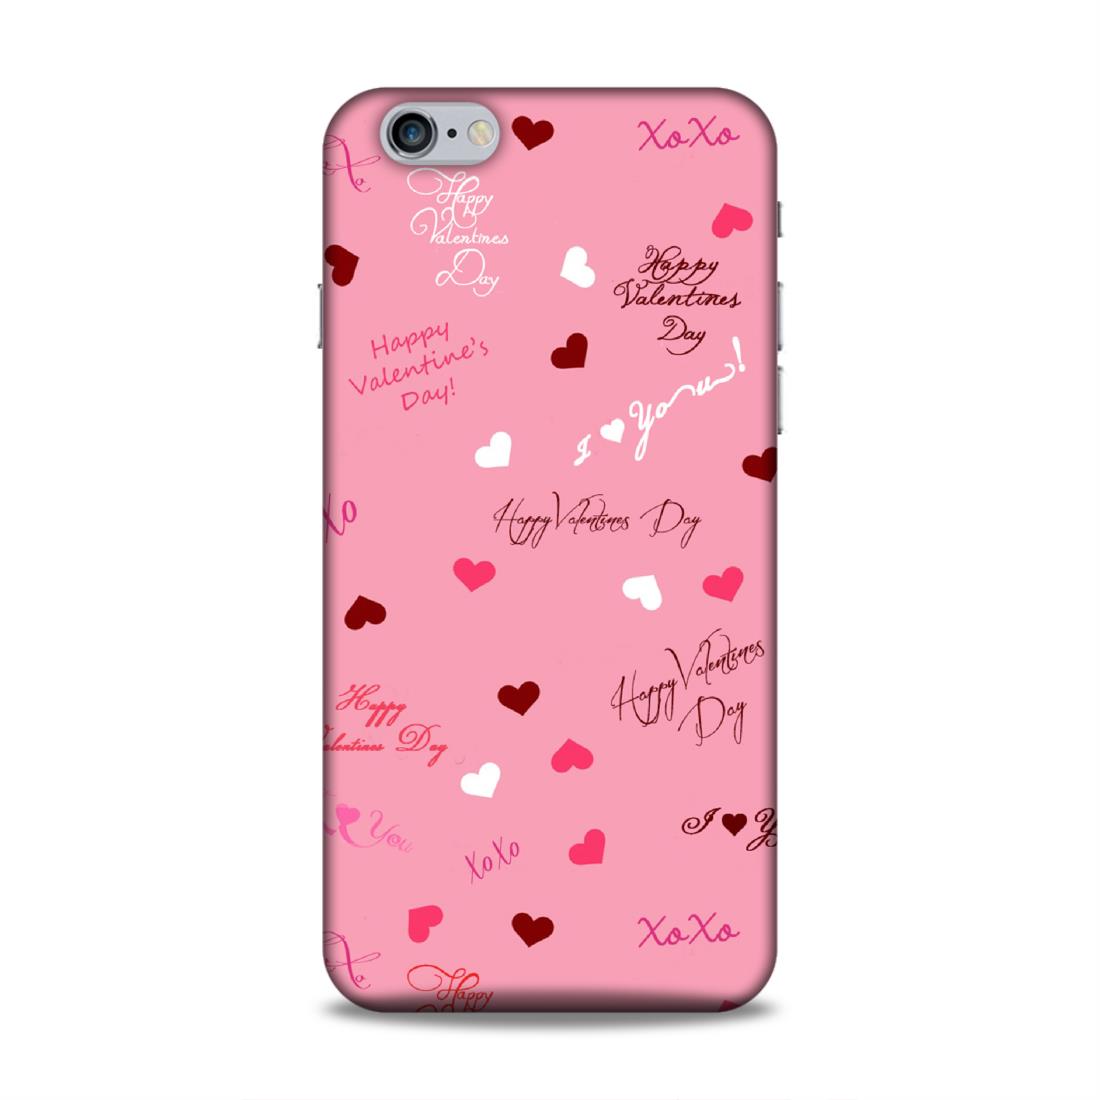 Happy Valentines Day Hard Back Case For Apple iPhone 6 Plus / 6s Plus